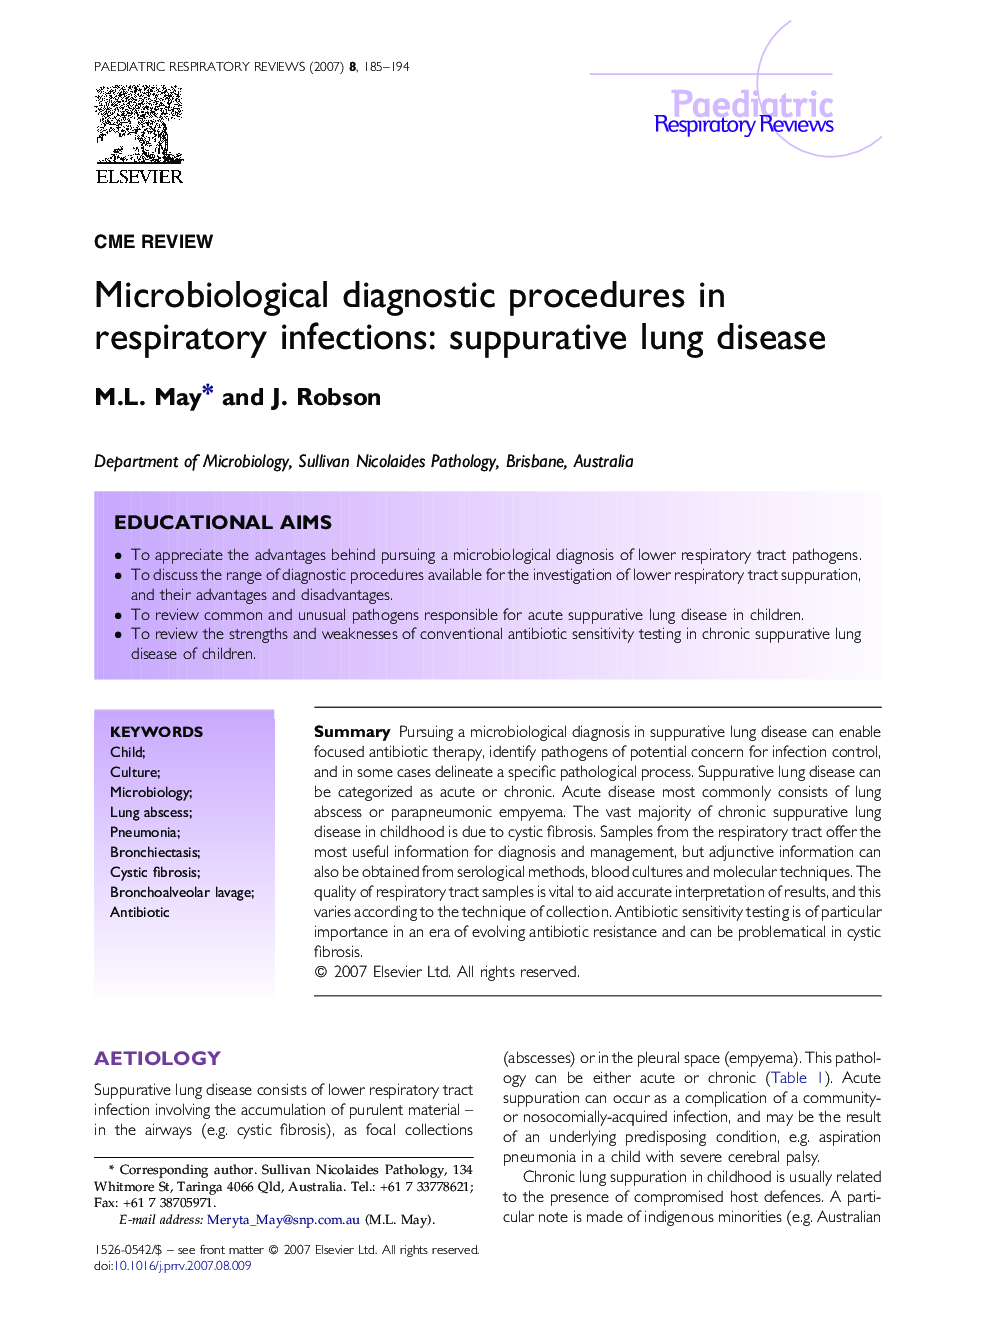 Microbiological diagnostic procedures in respiratory infections: suppurative lung disease